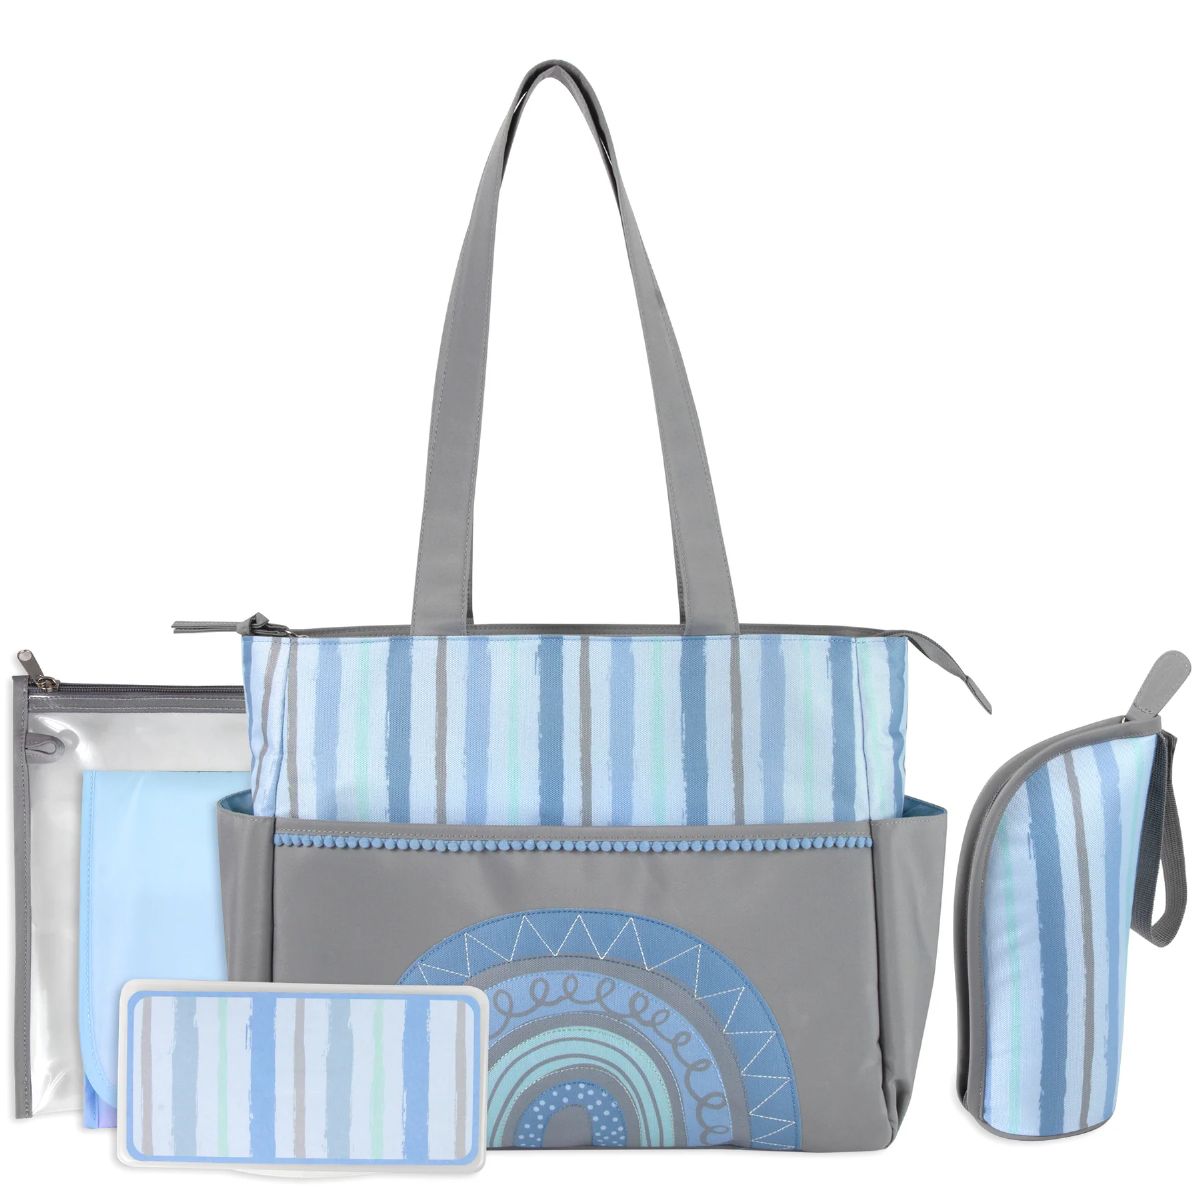 12 Pieces of Baby Essentials Diaper Bag Tote 5 Piece Set Blue Rainbow Themed